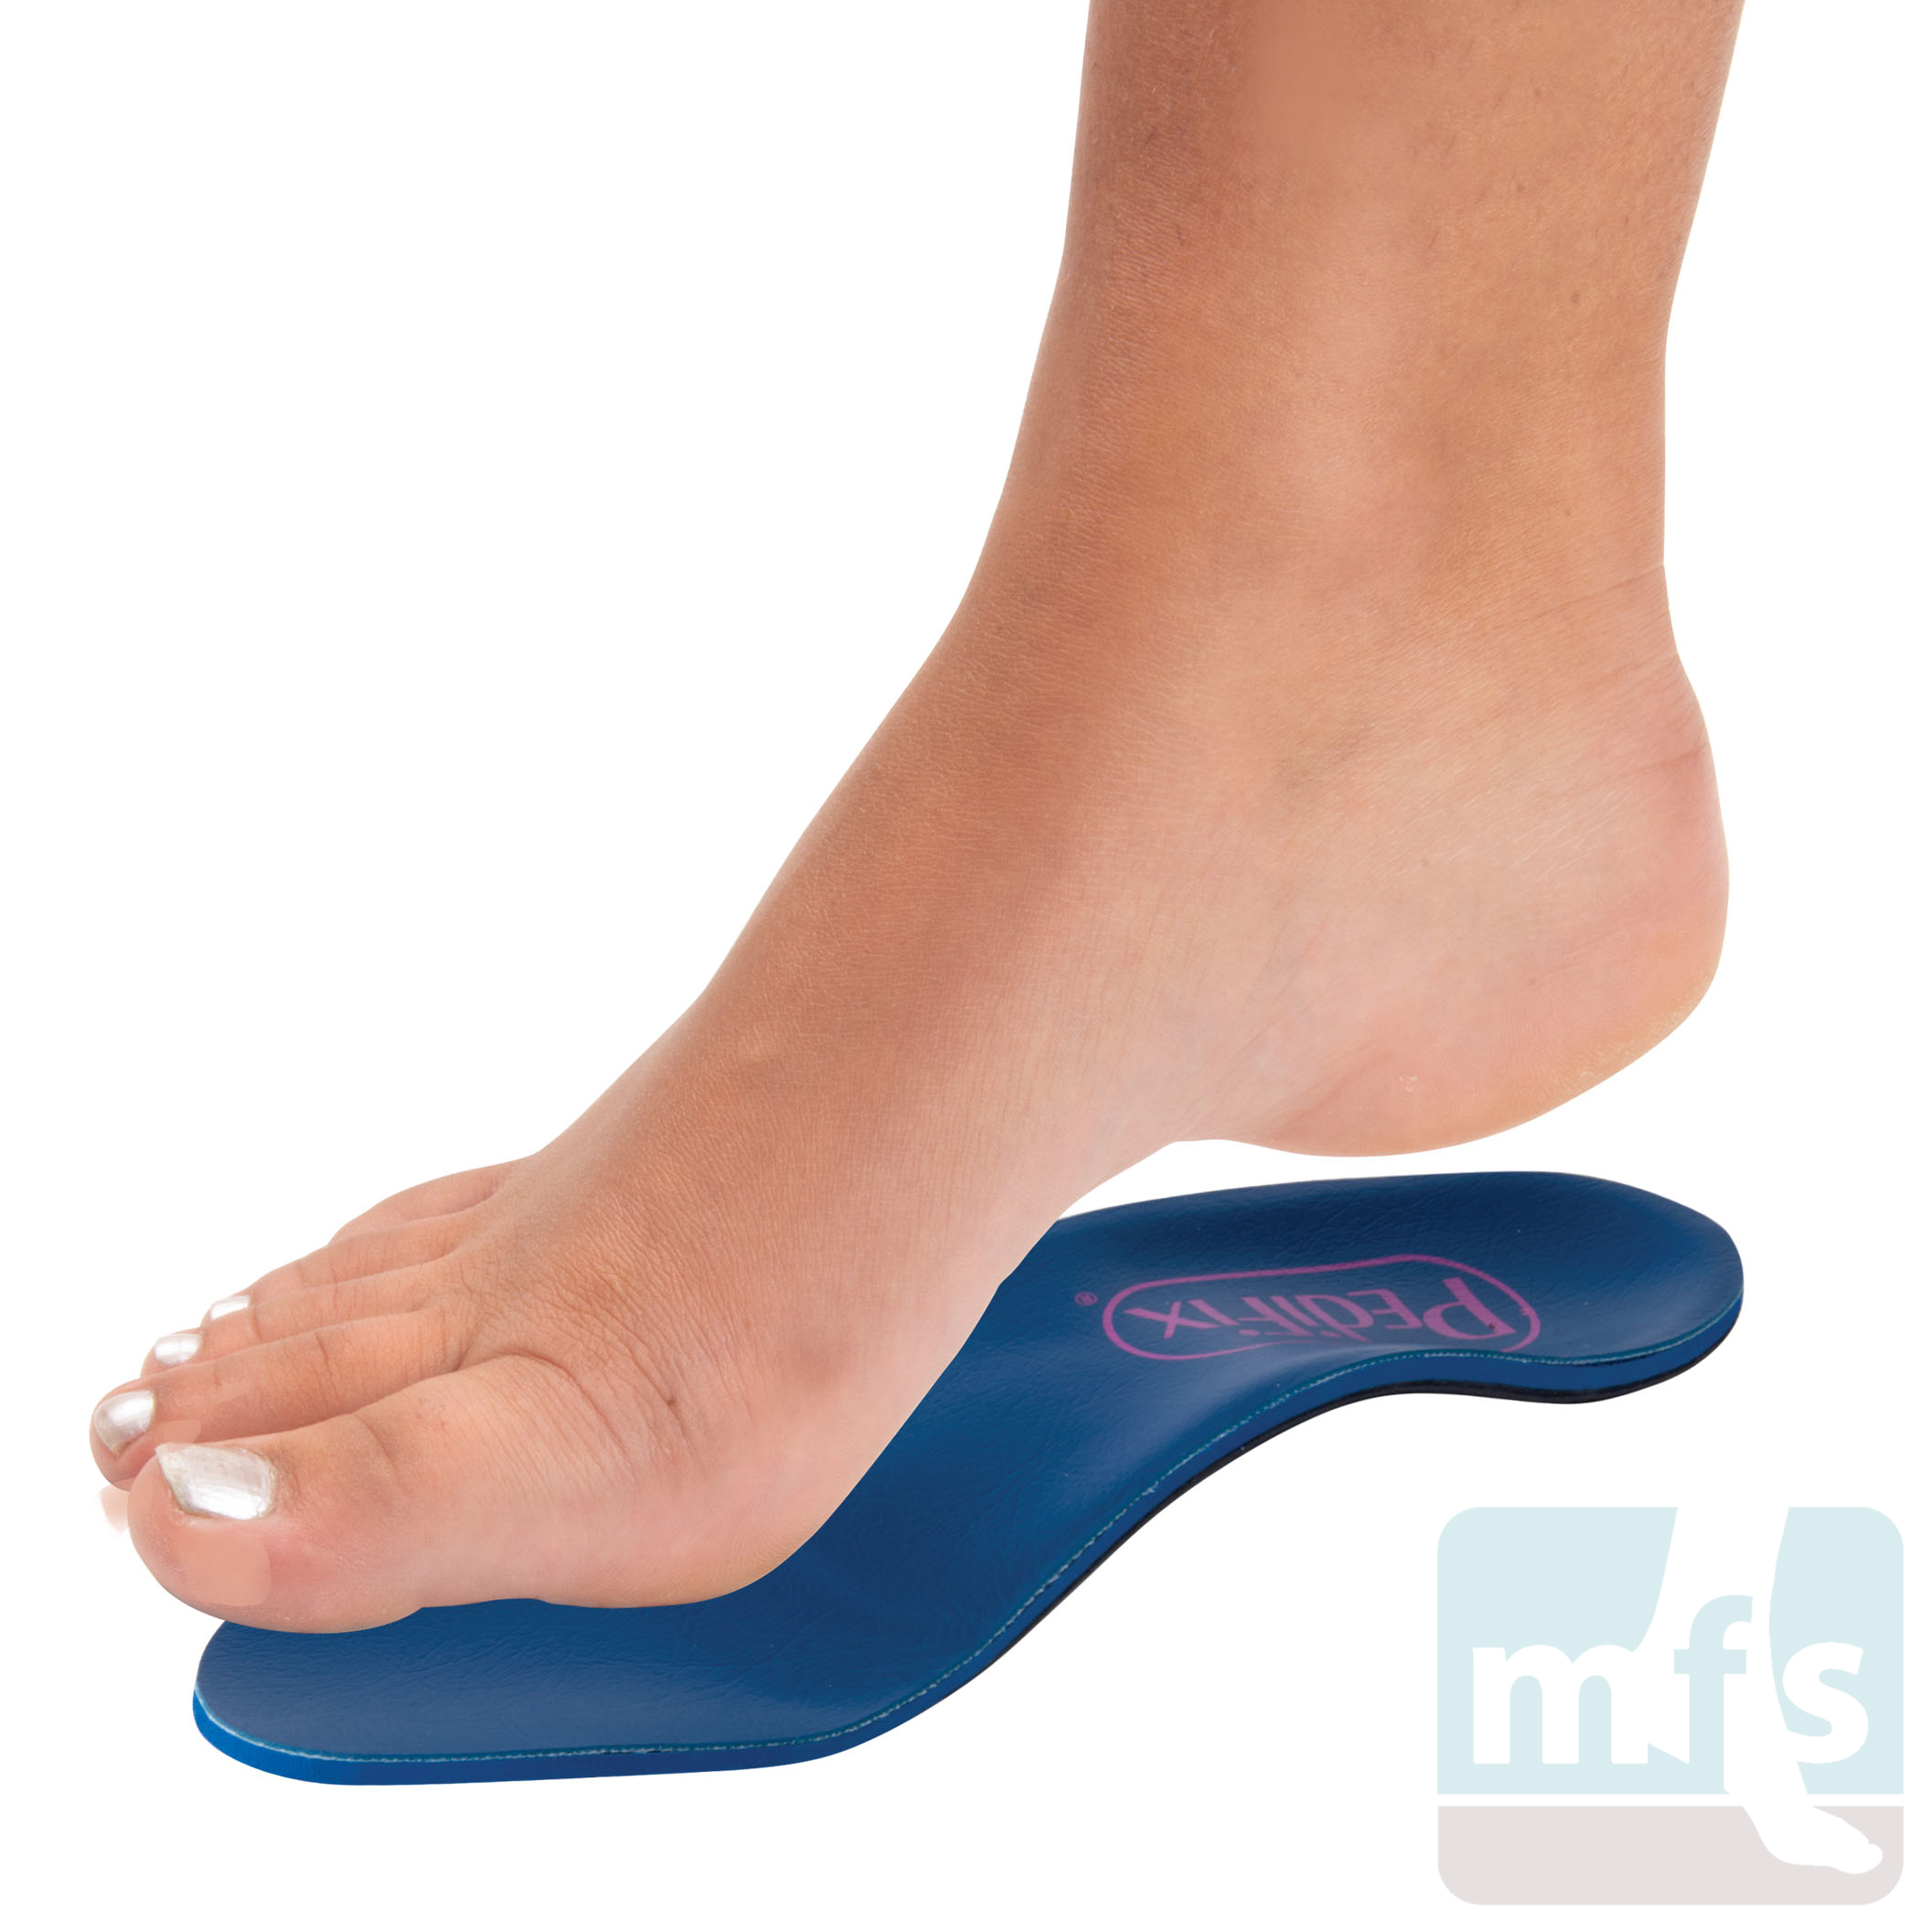 DOCTOR LE PARCO Arch Gel Support Silicone,Orthopedic Shoe Insole  (Blue)-Medium Insole - Buy DOCTOR LE PARCO Arch Gel Support Silicone, Orthopedic Shoe Insole (Blue)-Medium Insole Online at Best Prices in India  - Fitness |